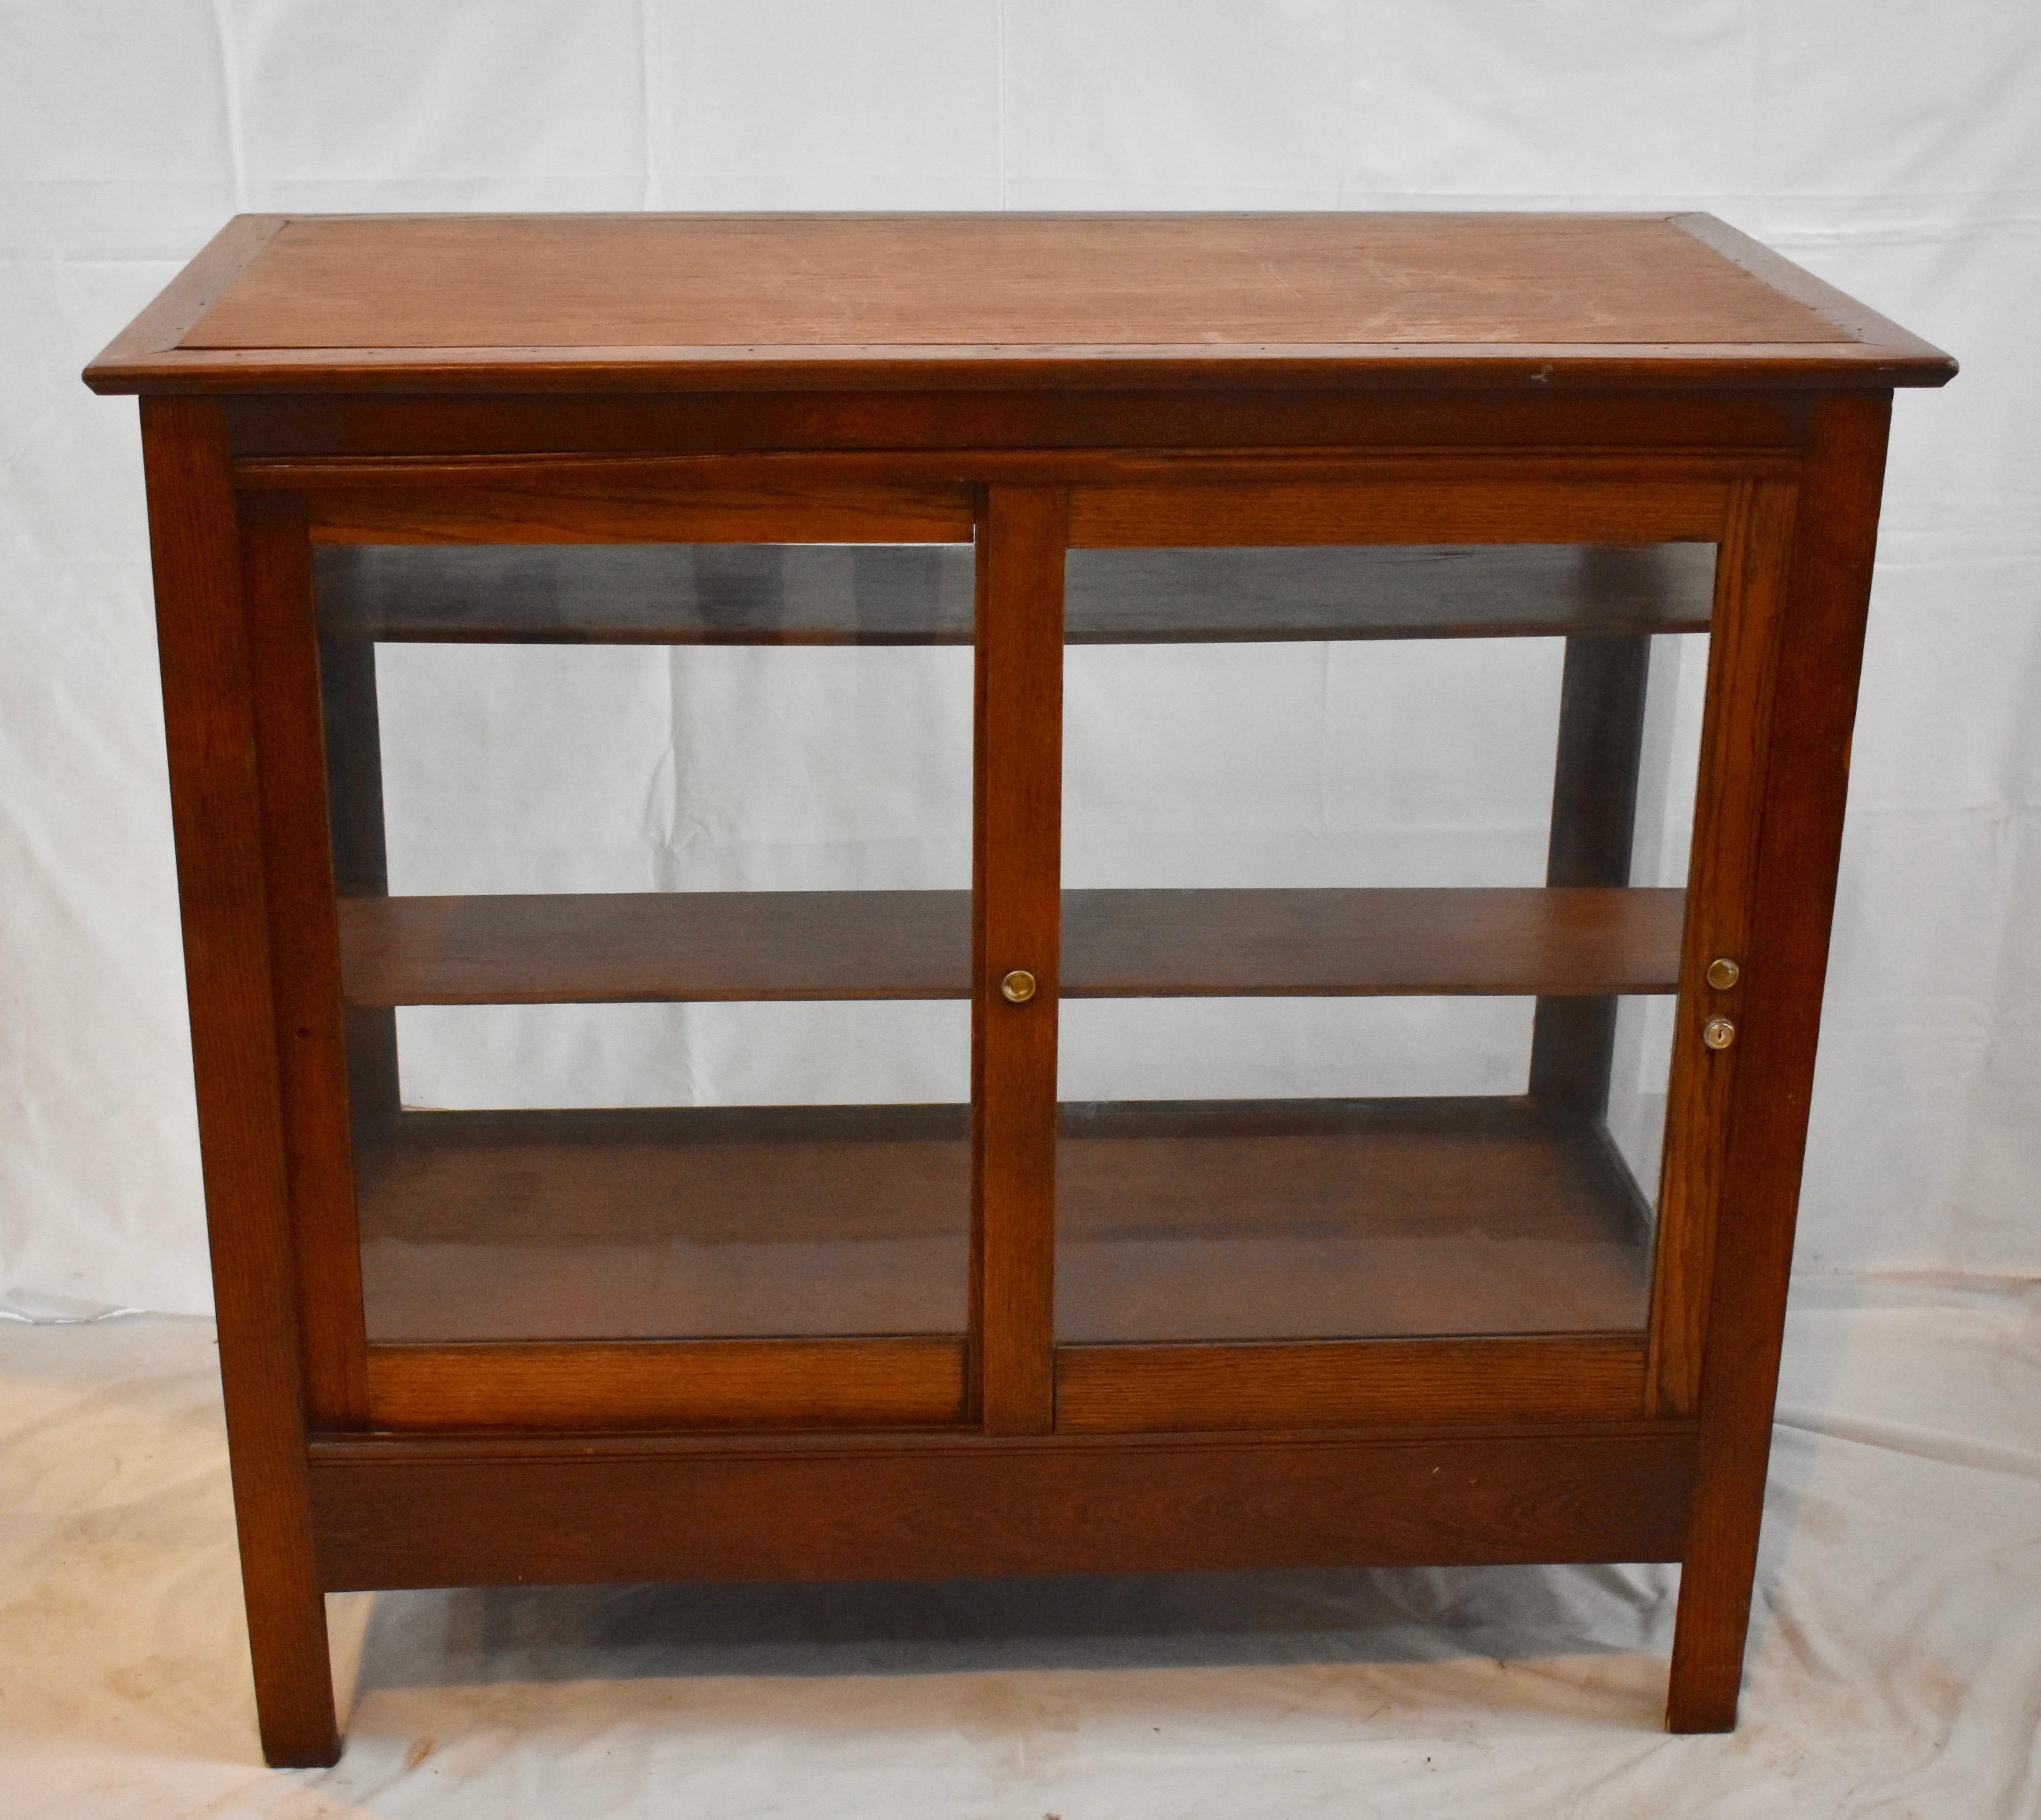 Oak Candy Store Display Case 2